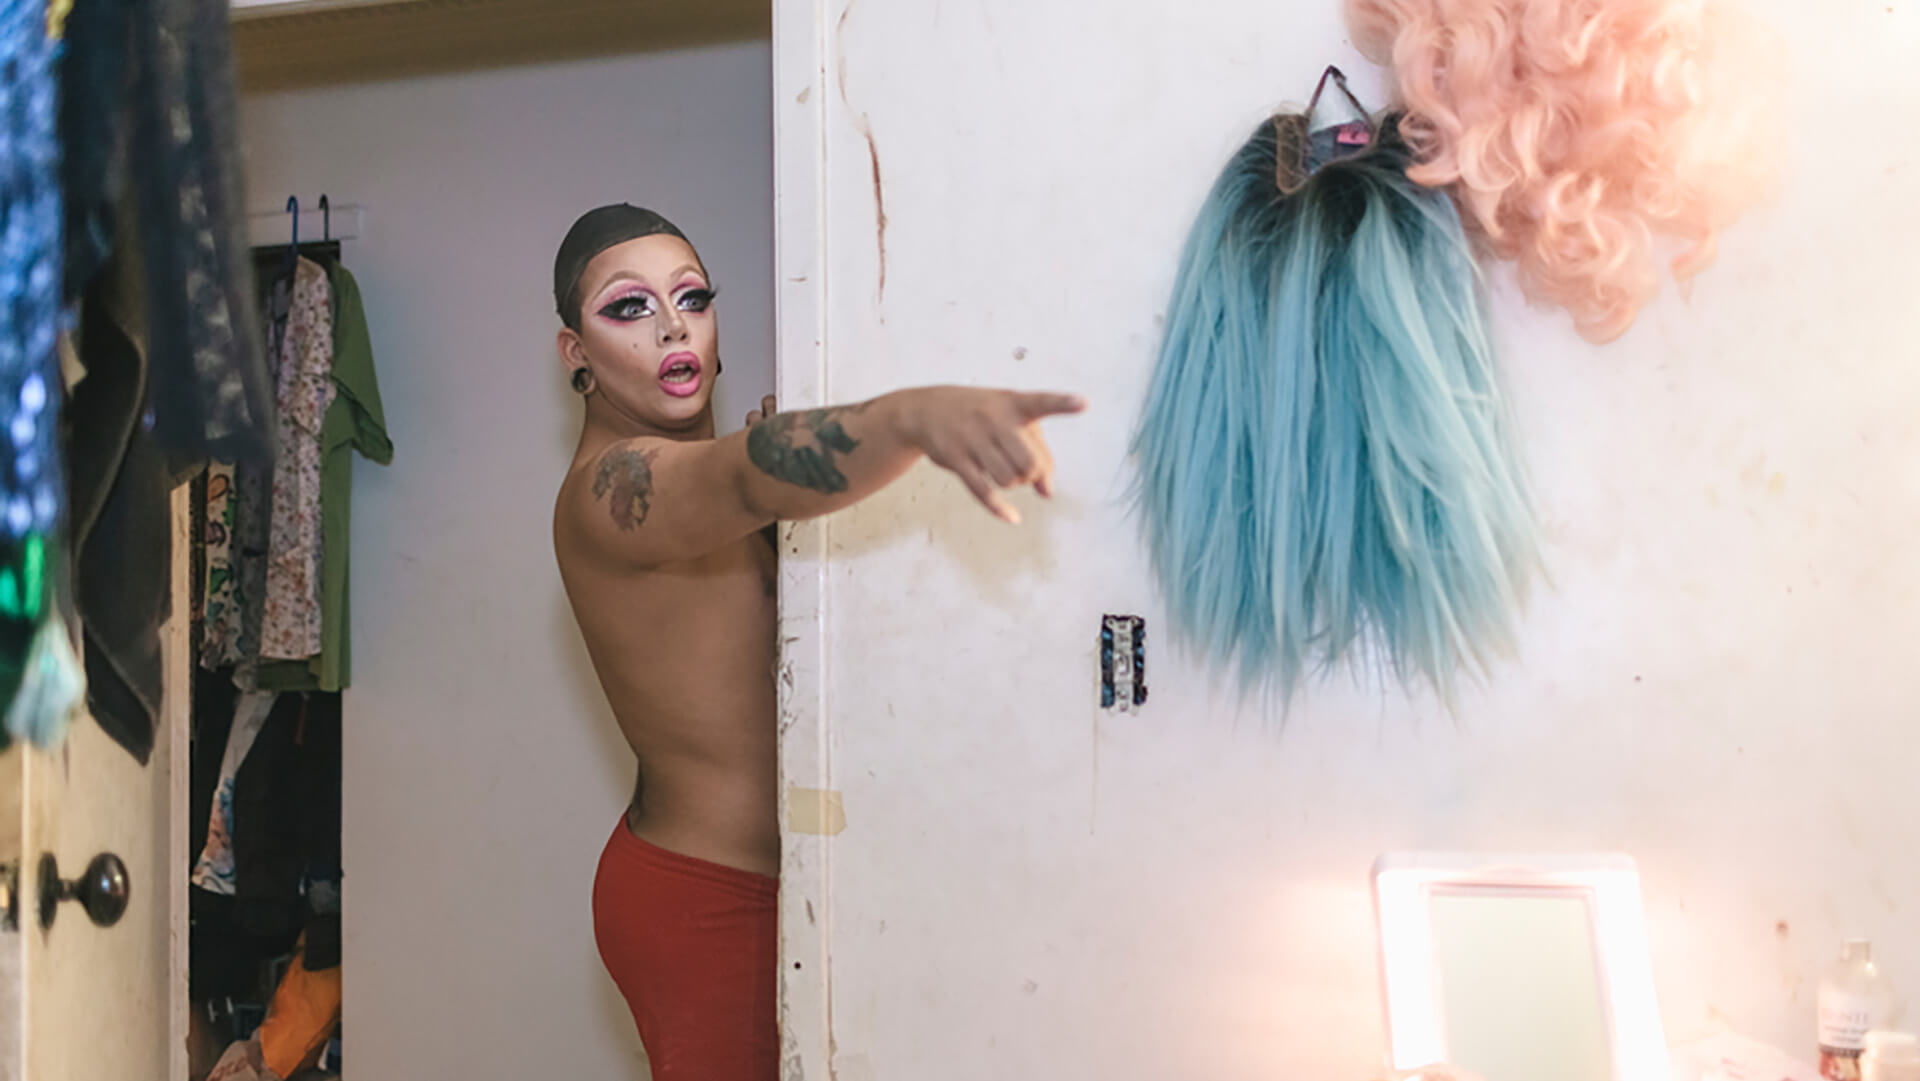 A day in the life of drag queens